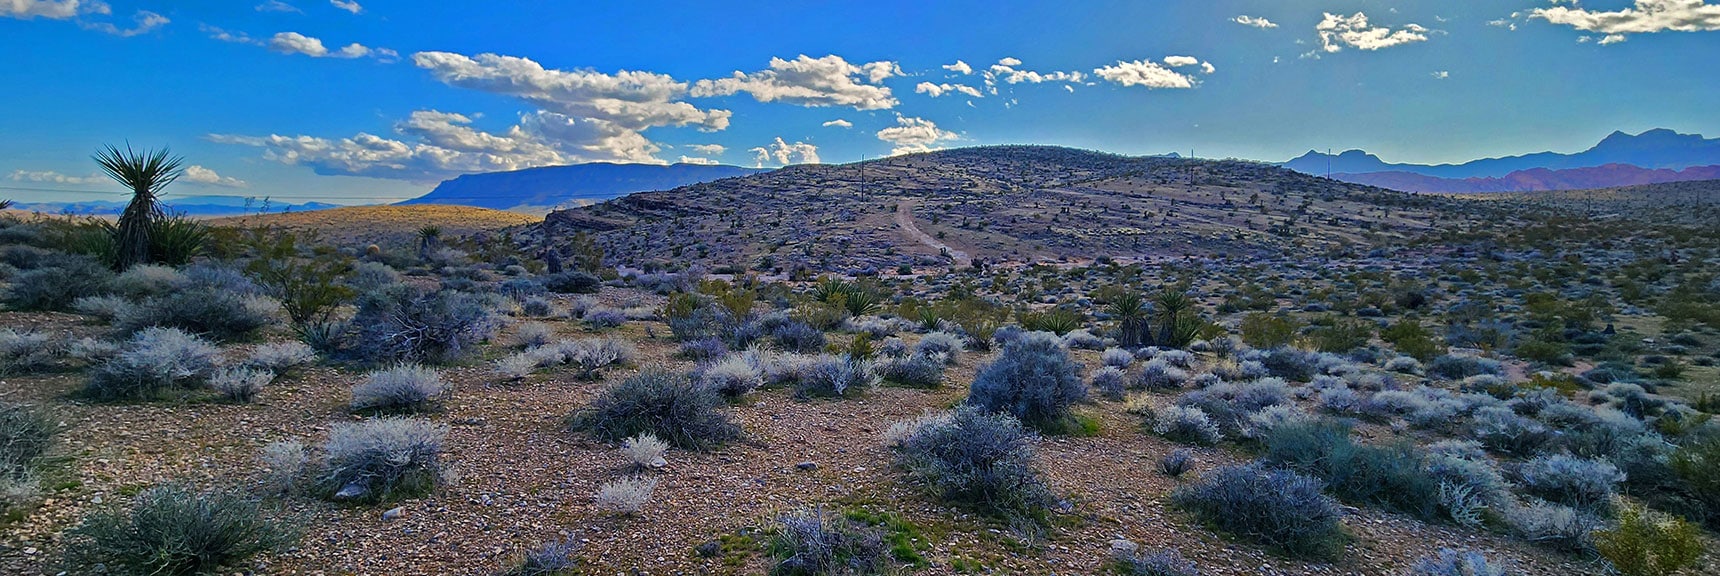 View Toward Peak 3844 Hill. Its Loop Trail is Visible. | Gray Cap Ridge Southeast Summit | La Madre Mountains Wilderness, Nevada